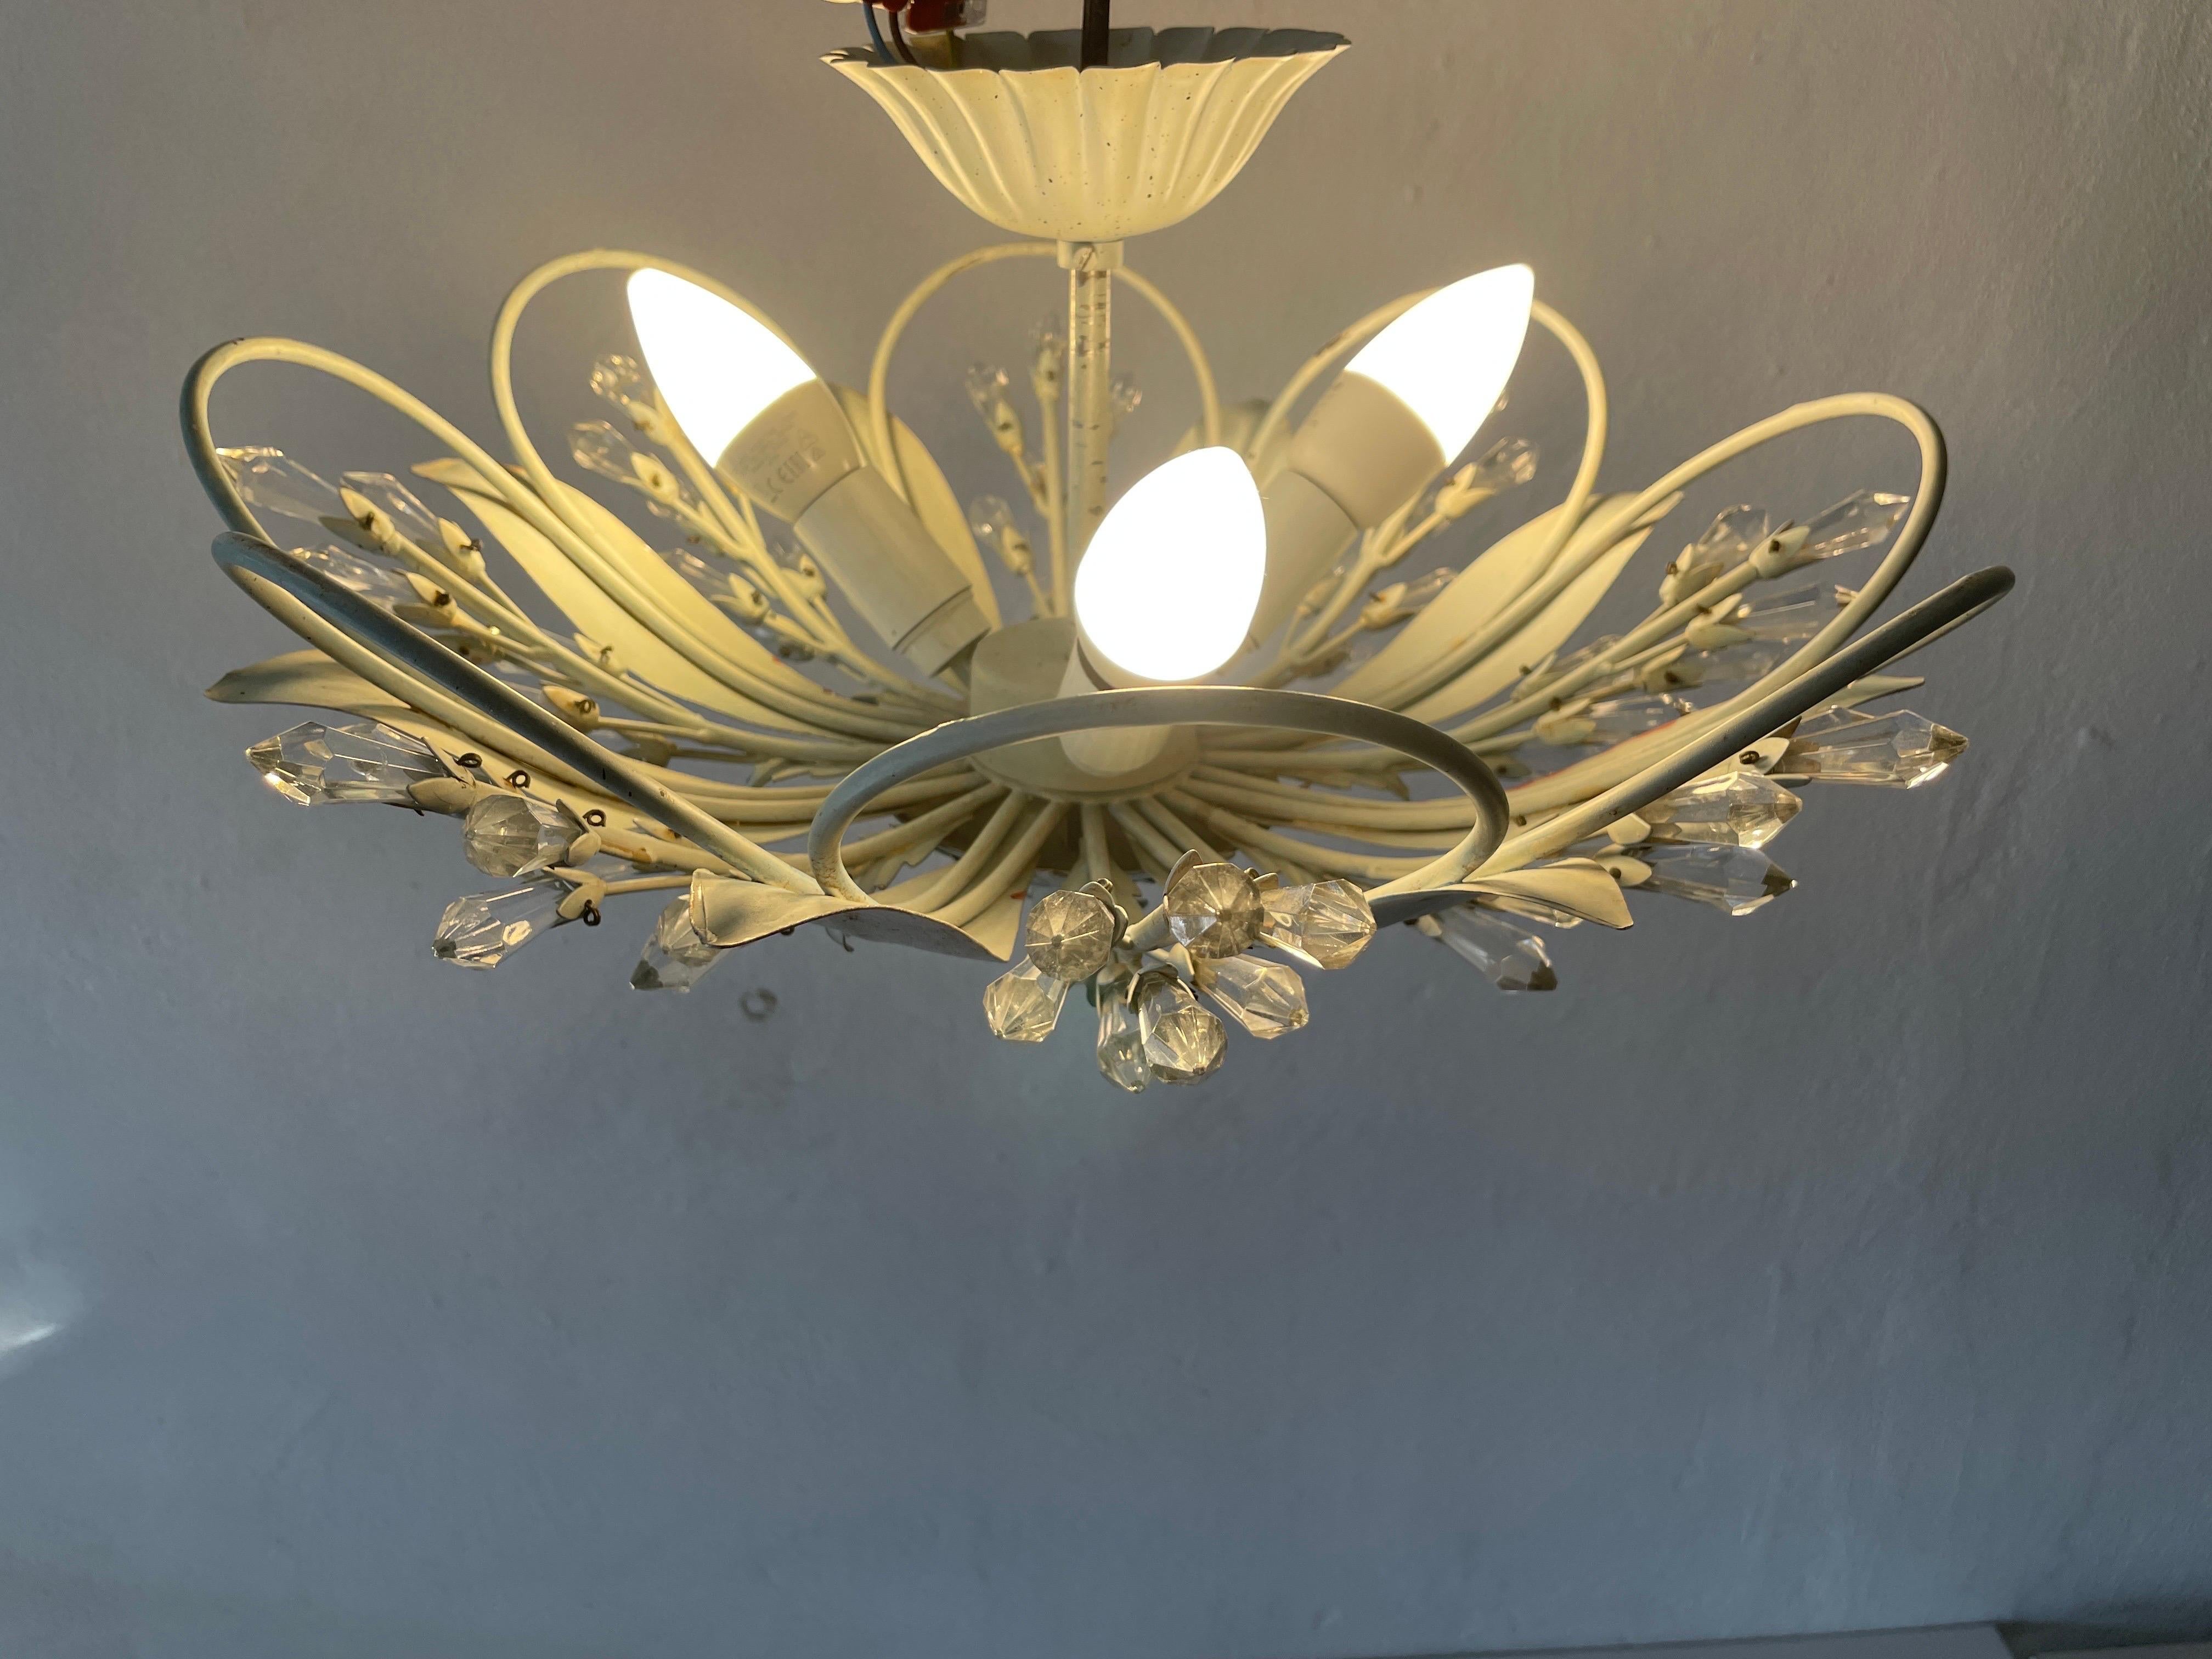 Flower Design Ceiling Lamp with Glass Ornaments, 1950s, Germany For Sale 13